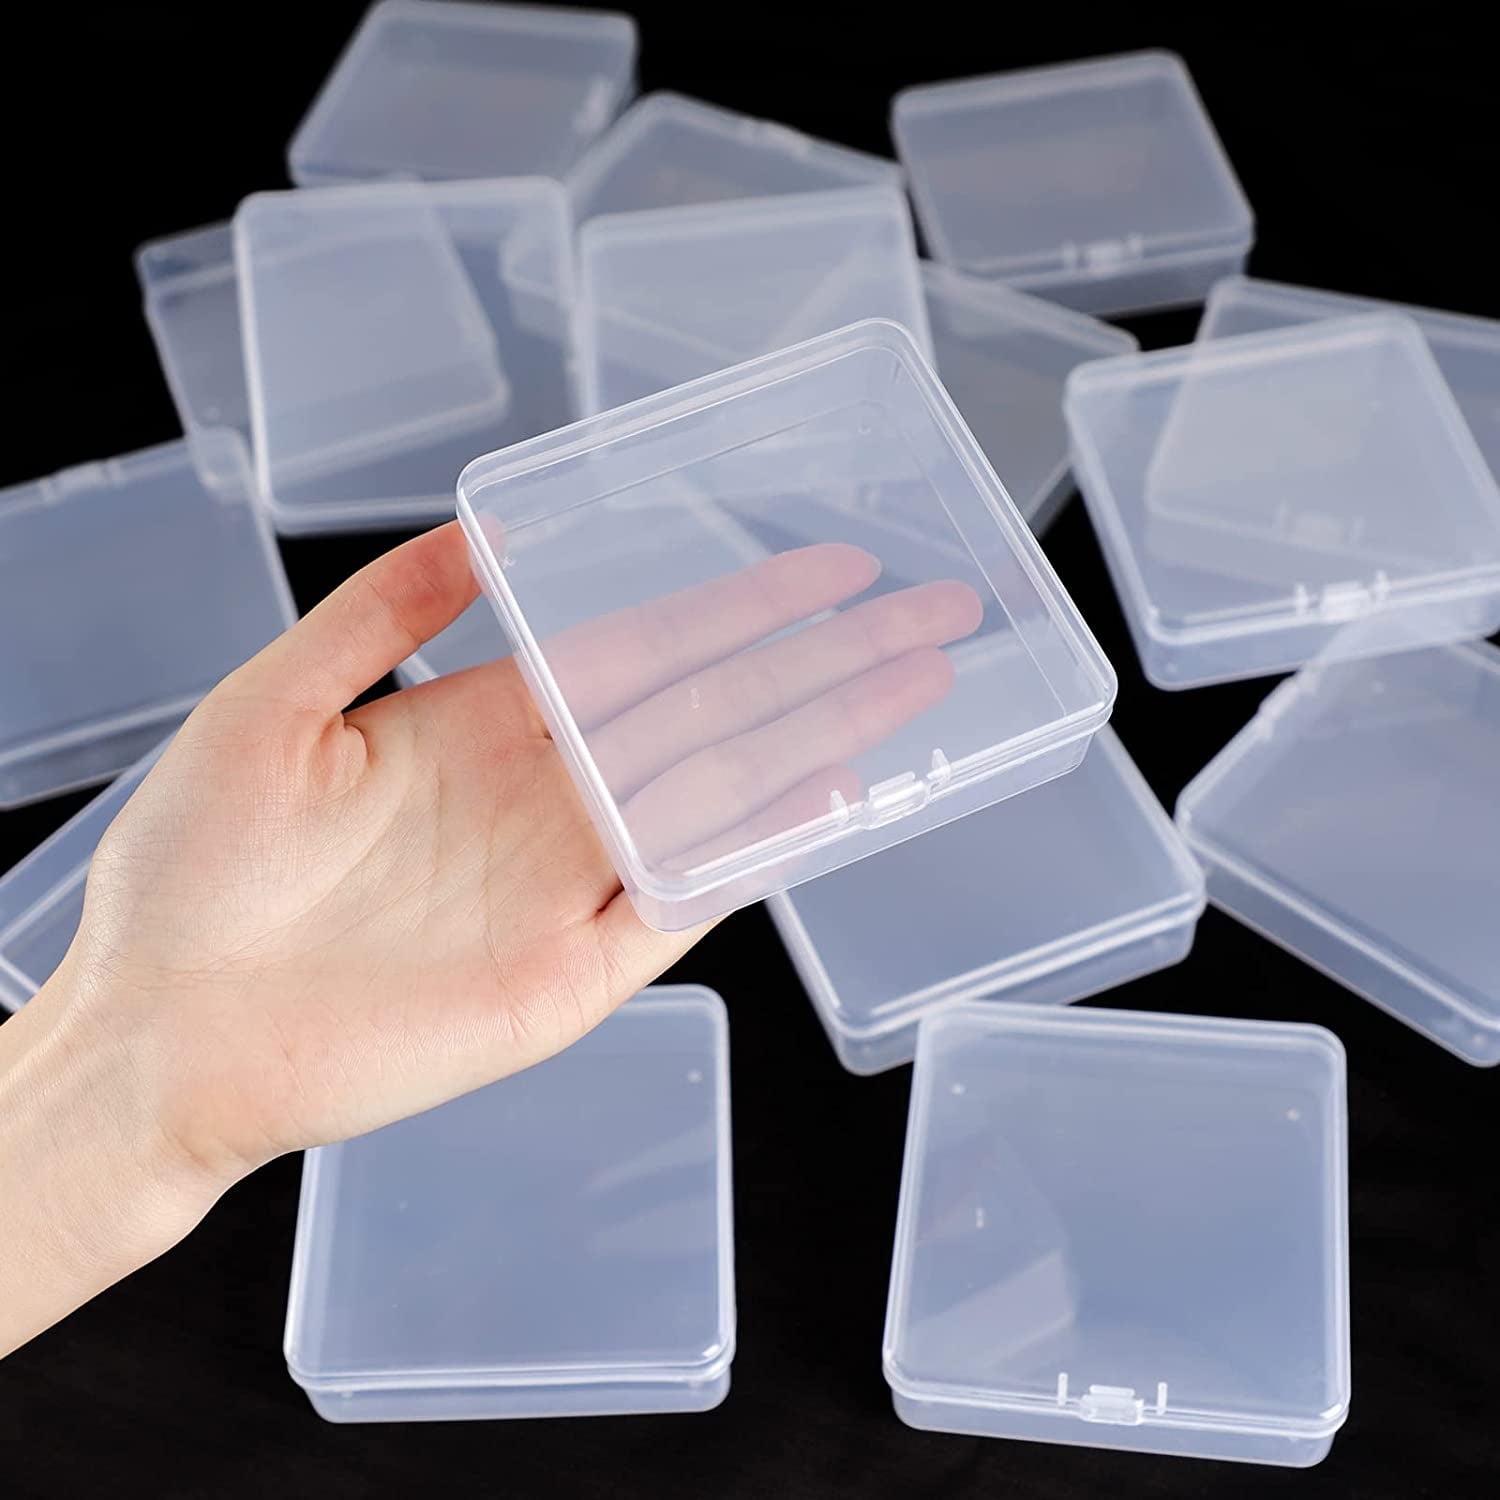 16 Pack Small Containers Clear Plastic Boxes with Hinged Lids